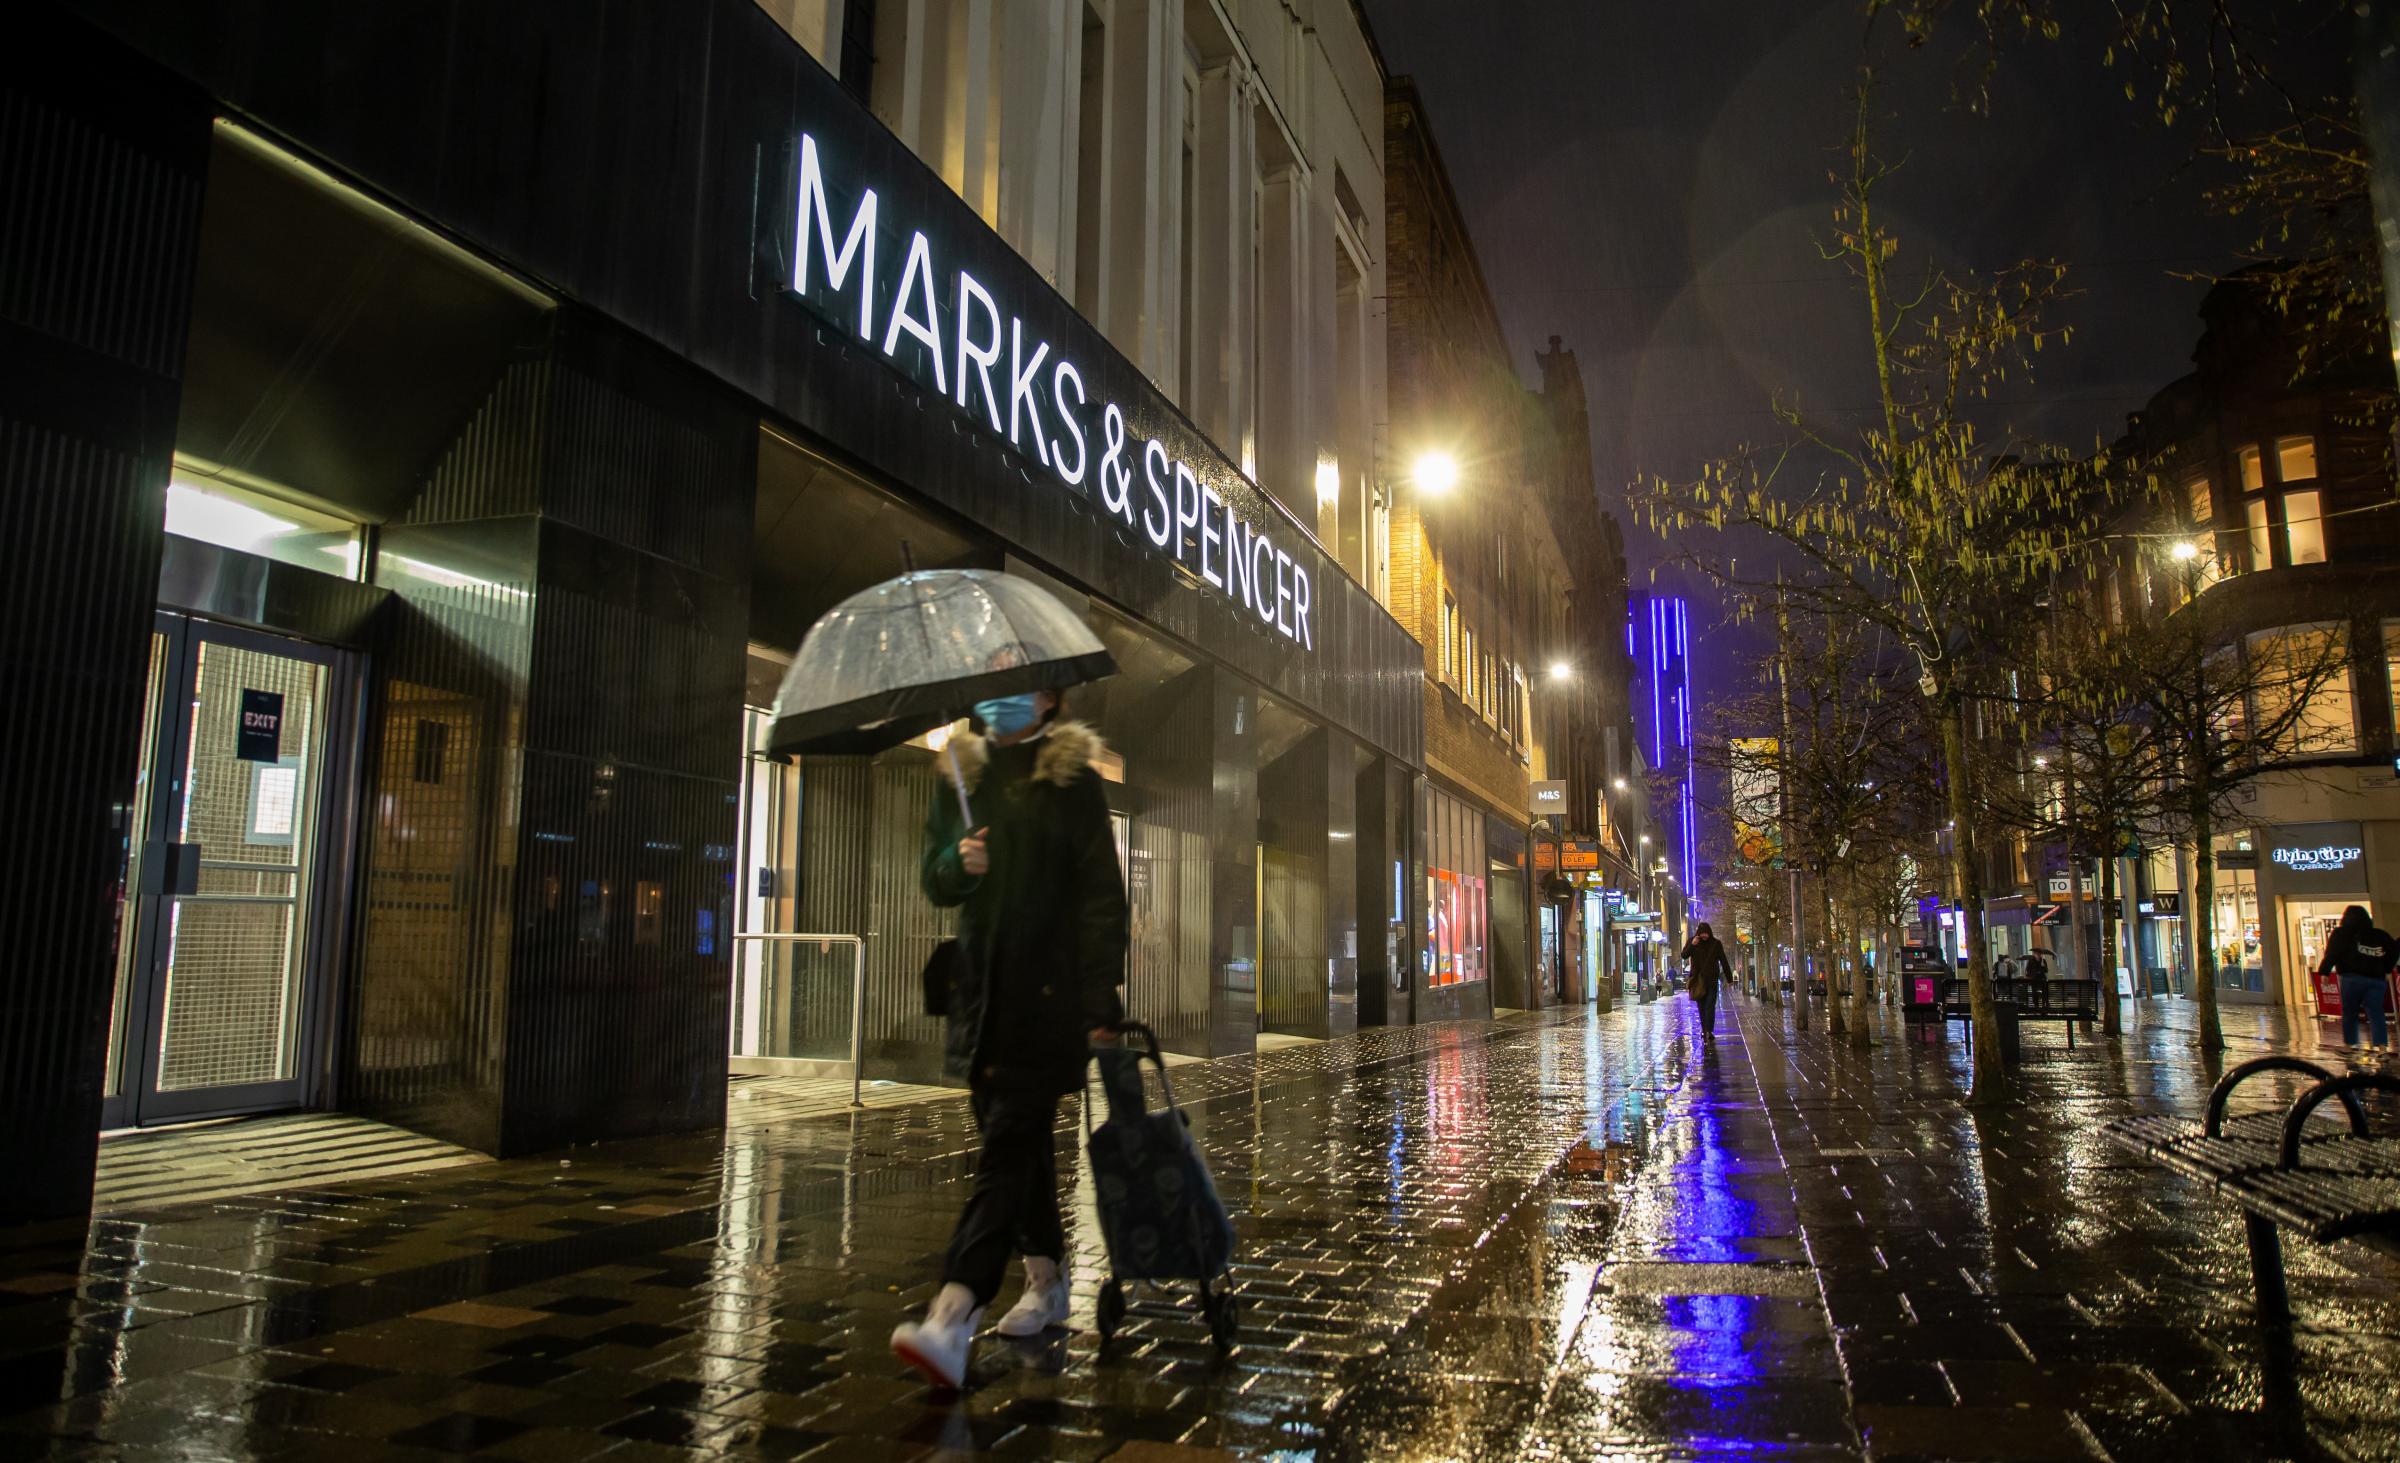 Marks & Spencer on Sauchiehall Street, closed its doors earlier this year